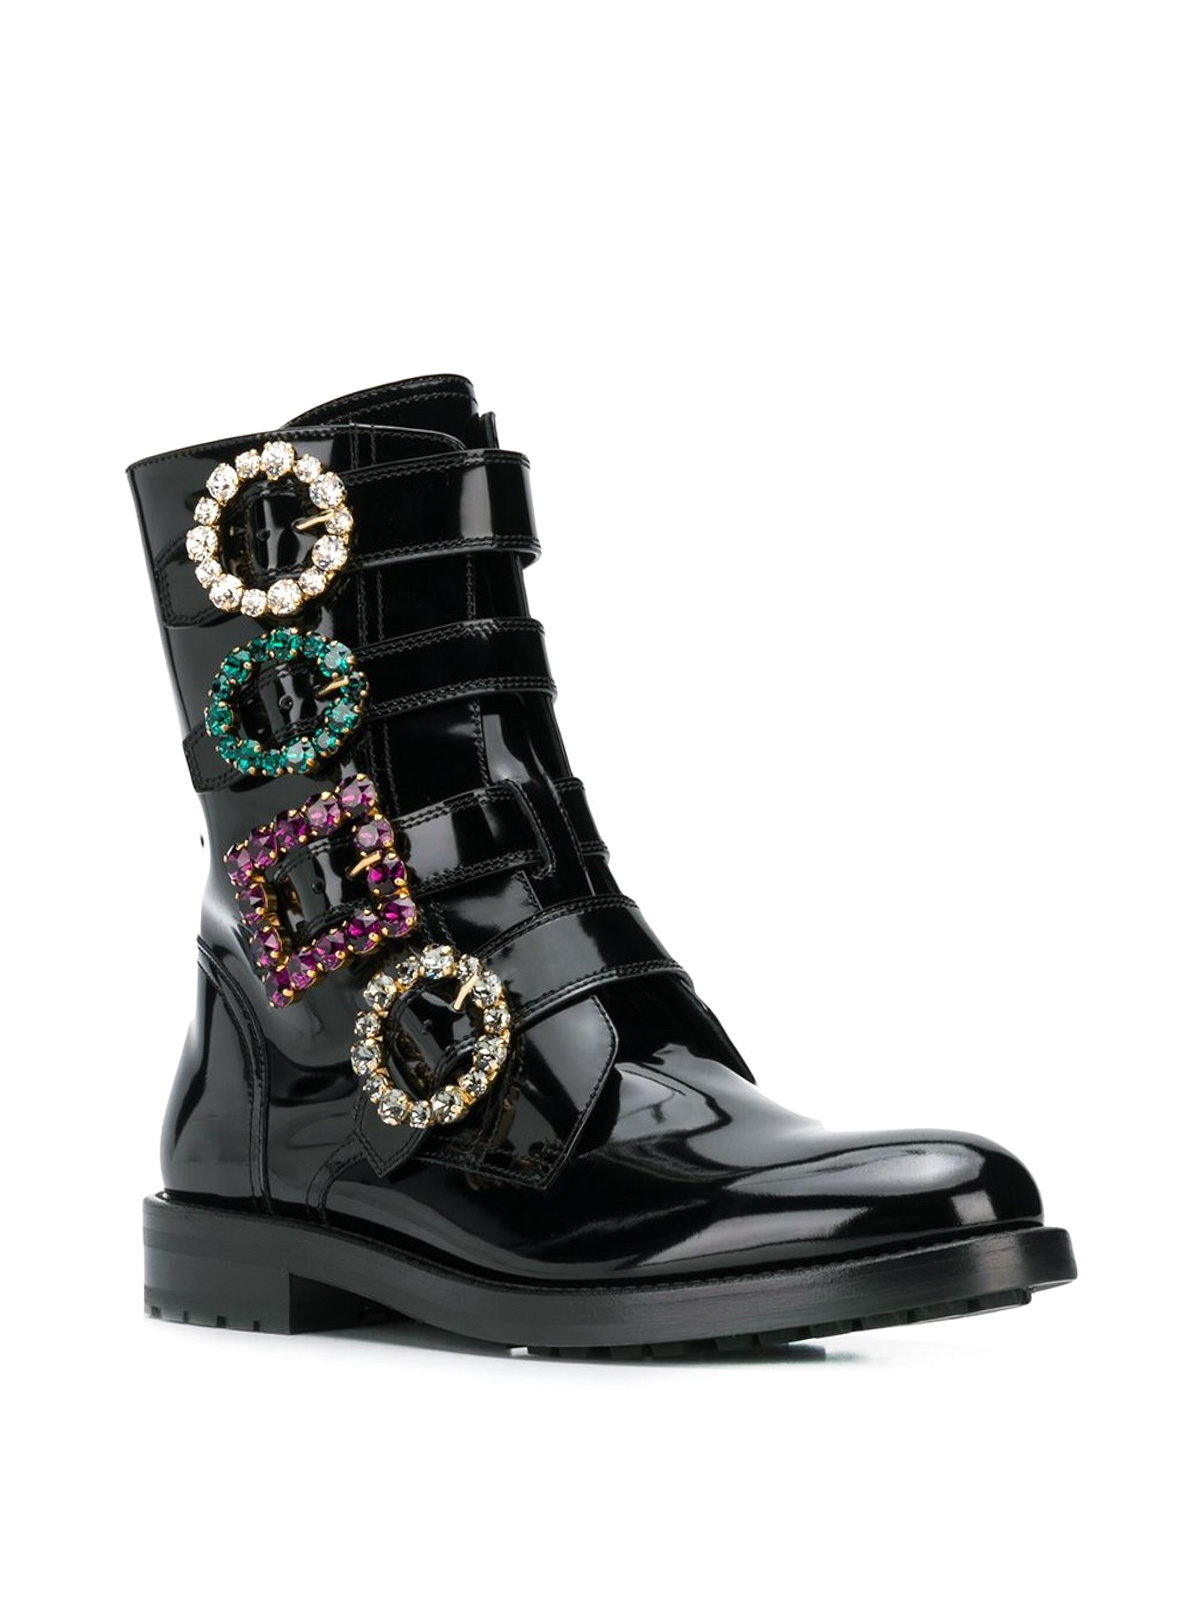 dolce and gabbana combat boots